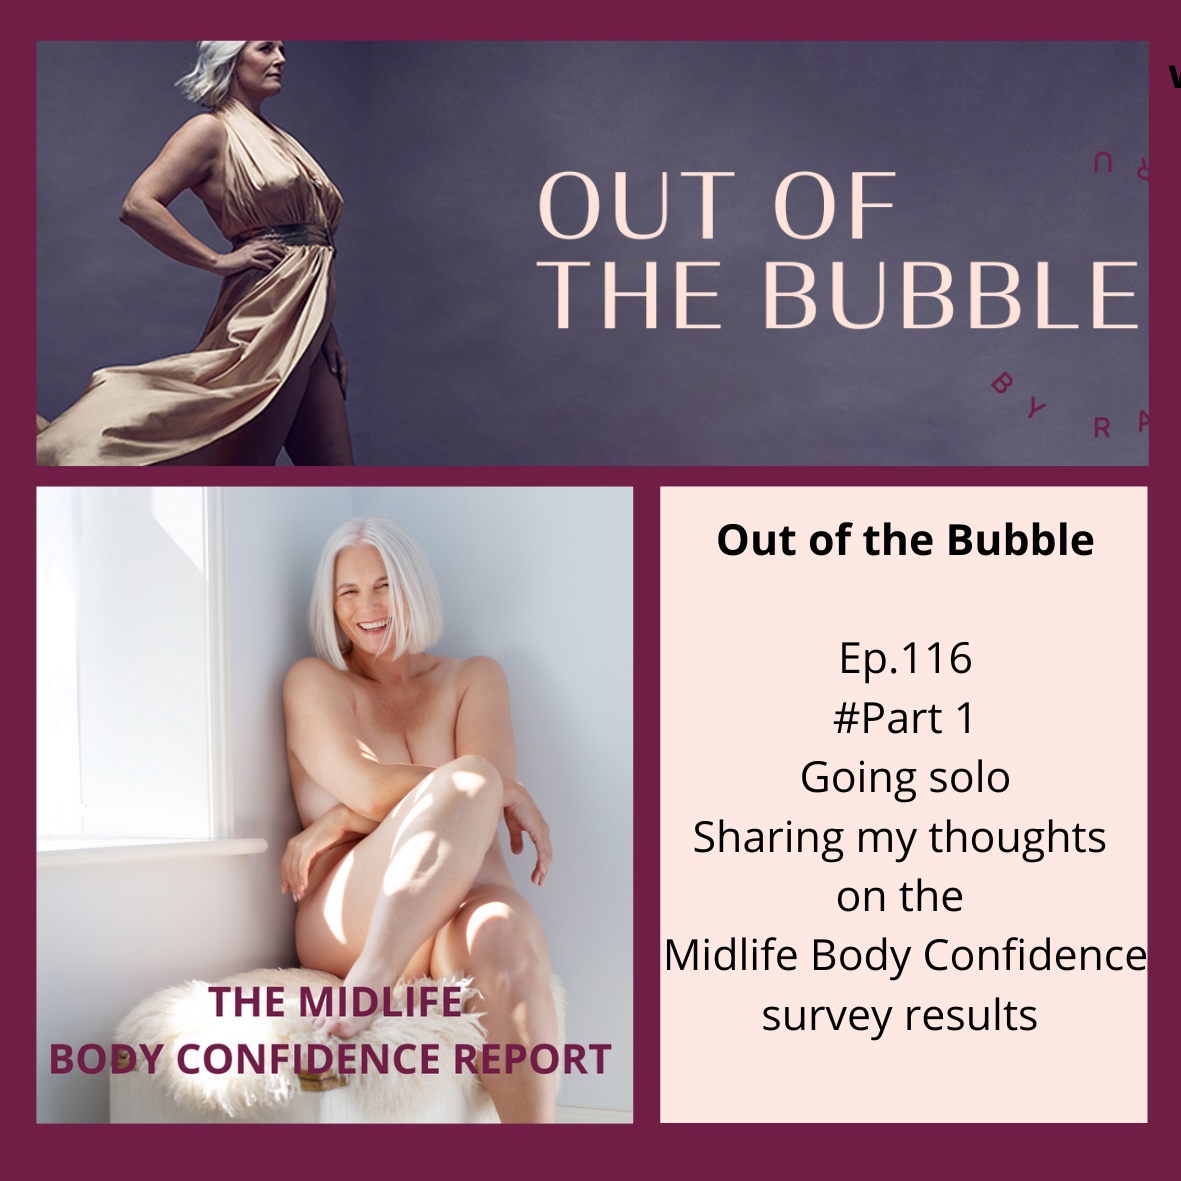 Ep.116 Going solo- Sharing my thoughts on the Midlife Body Confidence survey results